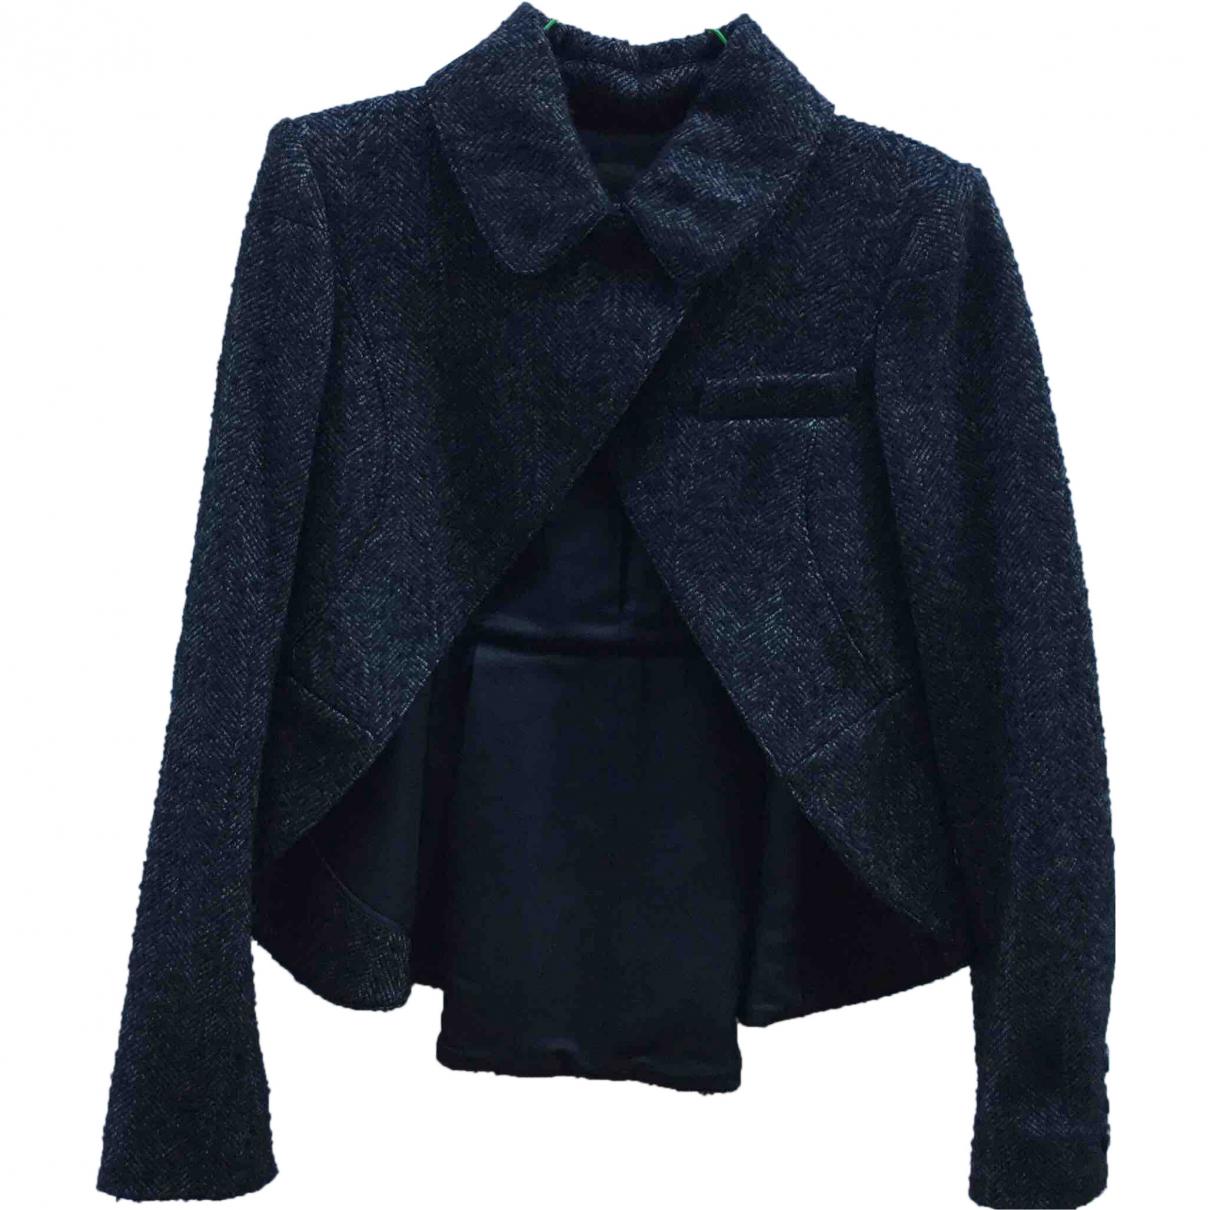 Lyst - Louis Vuitton Pre-owned Navy Wool Jackets in Blue